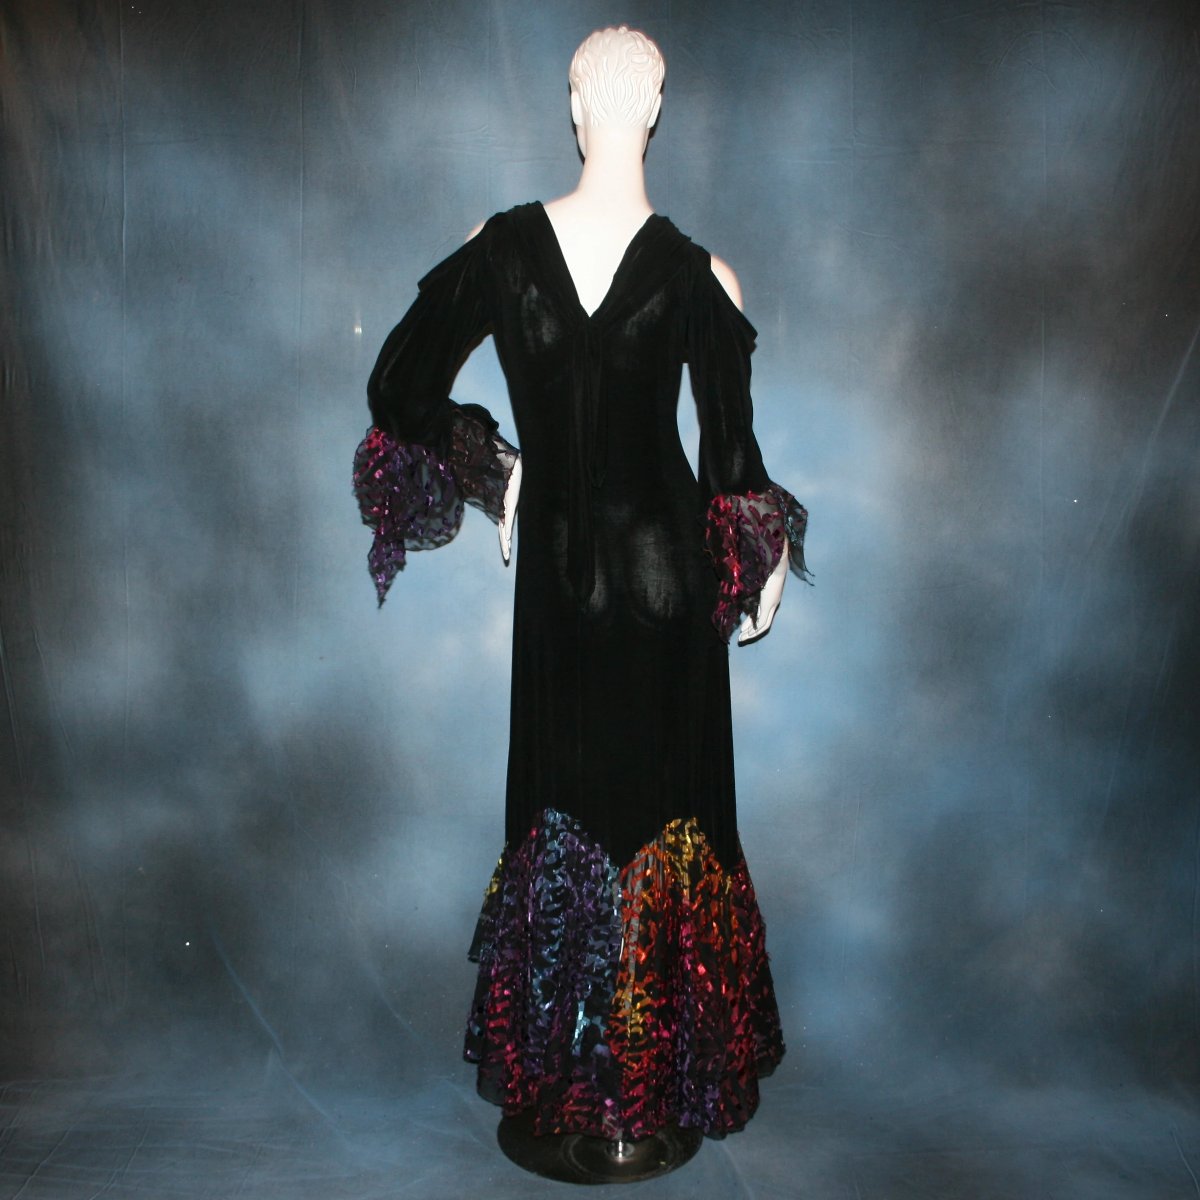 back view of Black social ballroom dress created in luxurious black solid slinky fabric with yards of gorgeous rainbow colorful & textured sheer fabric. A great social dress for any special occasion, as well as a great beginner ballroom show dress!